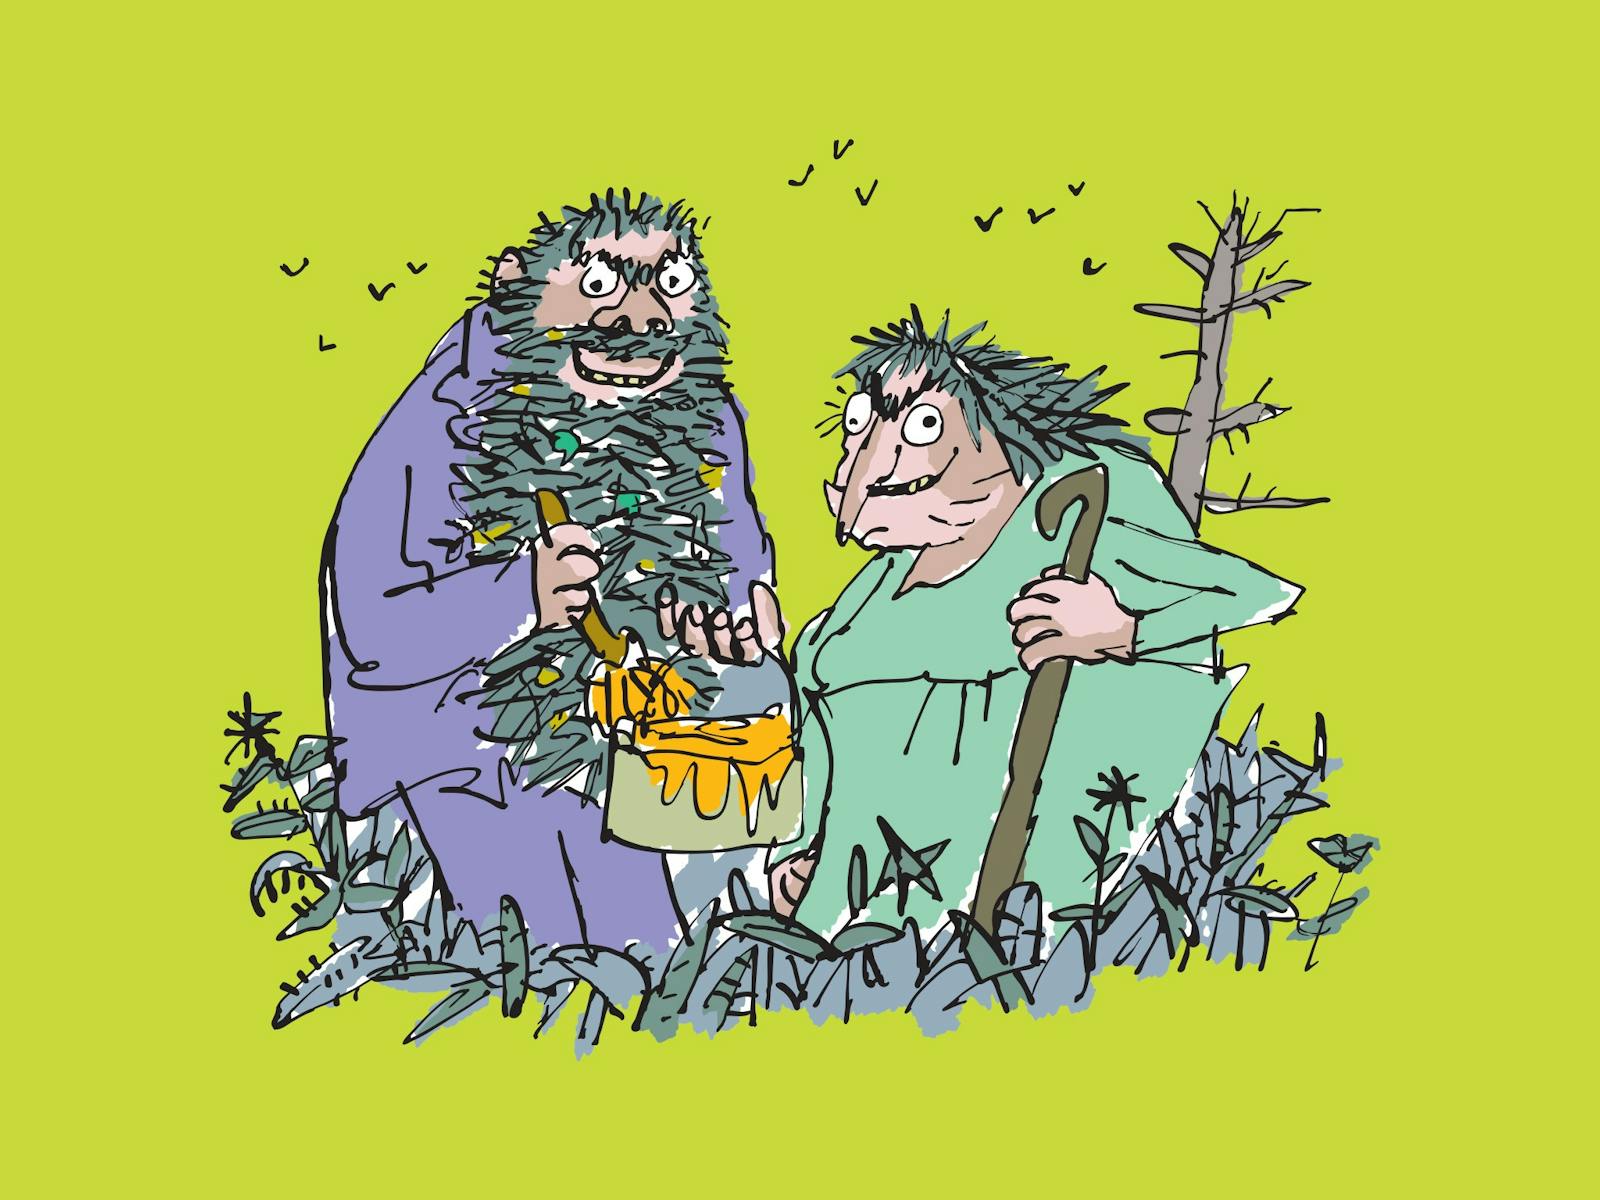 Image for Roald Dahl's The Twits